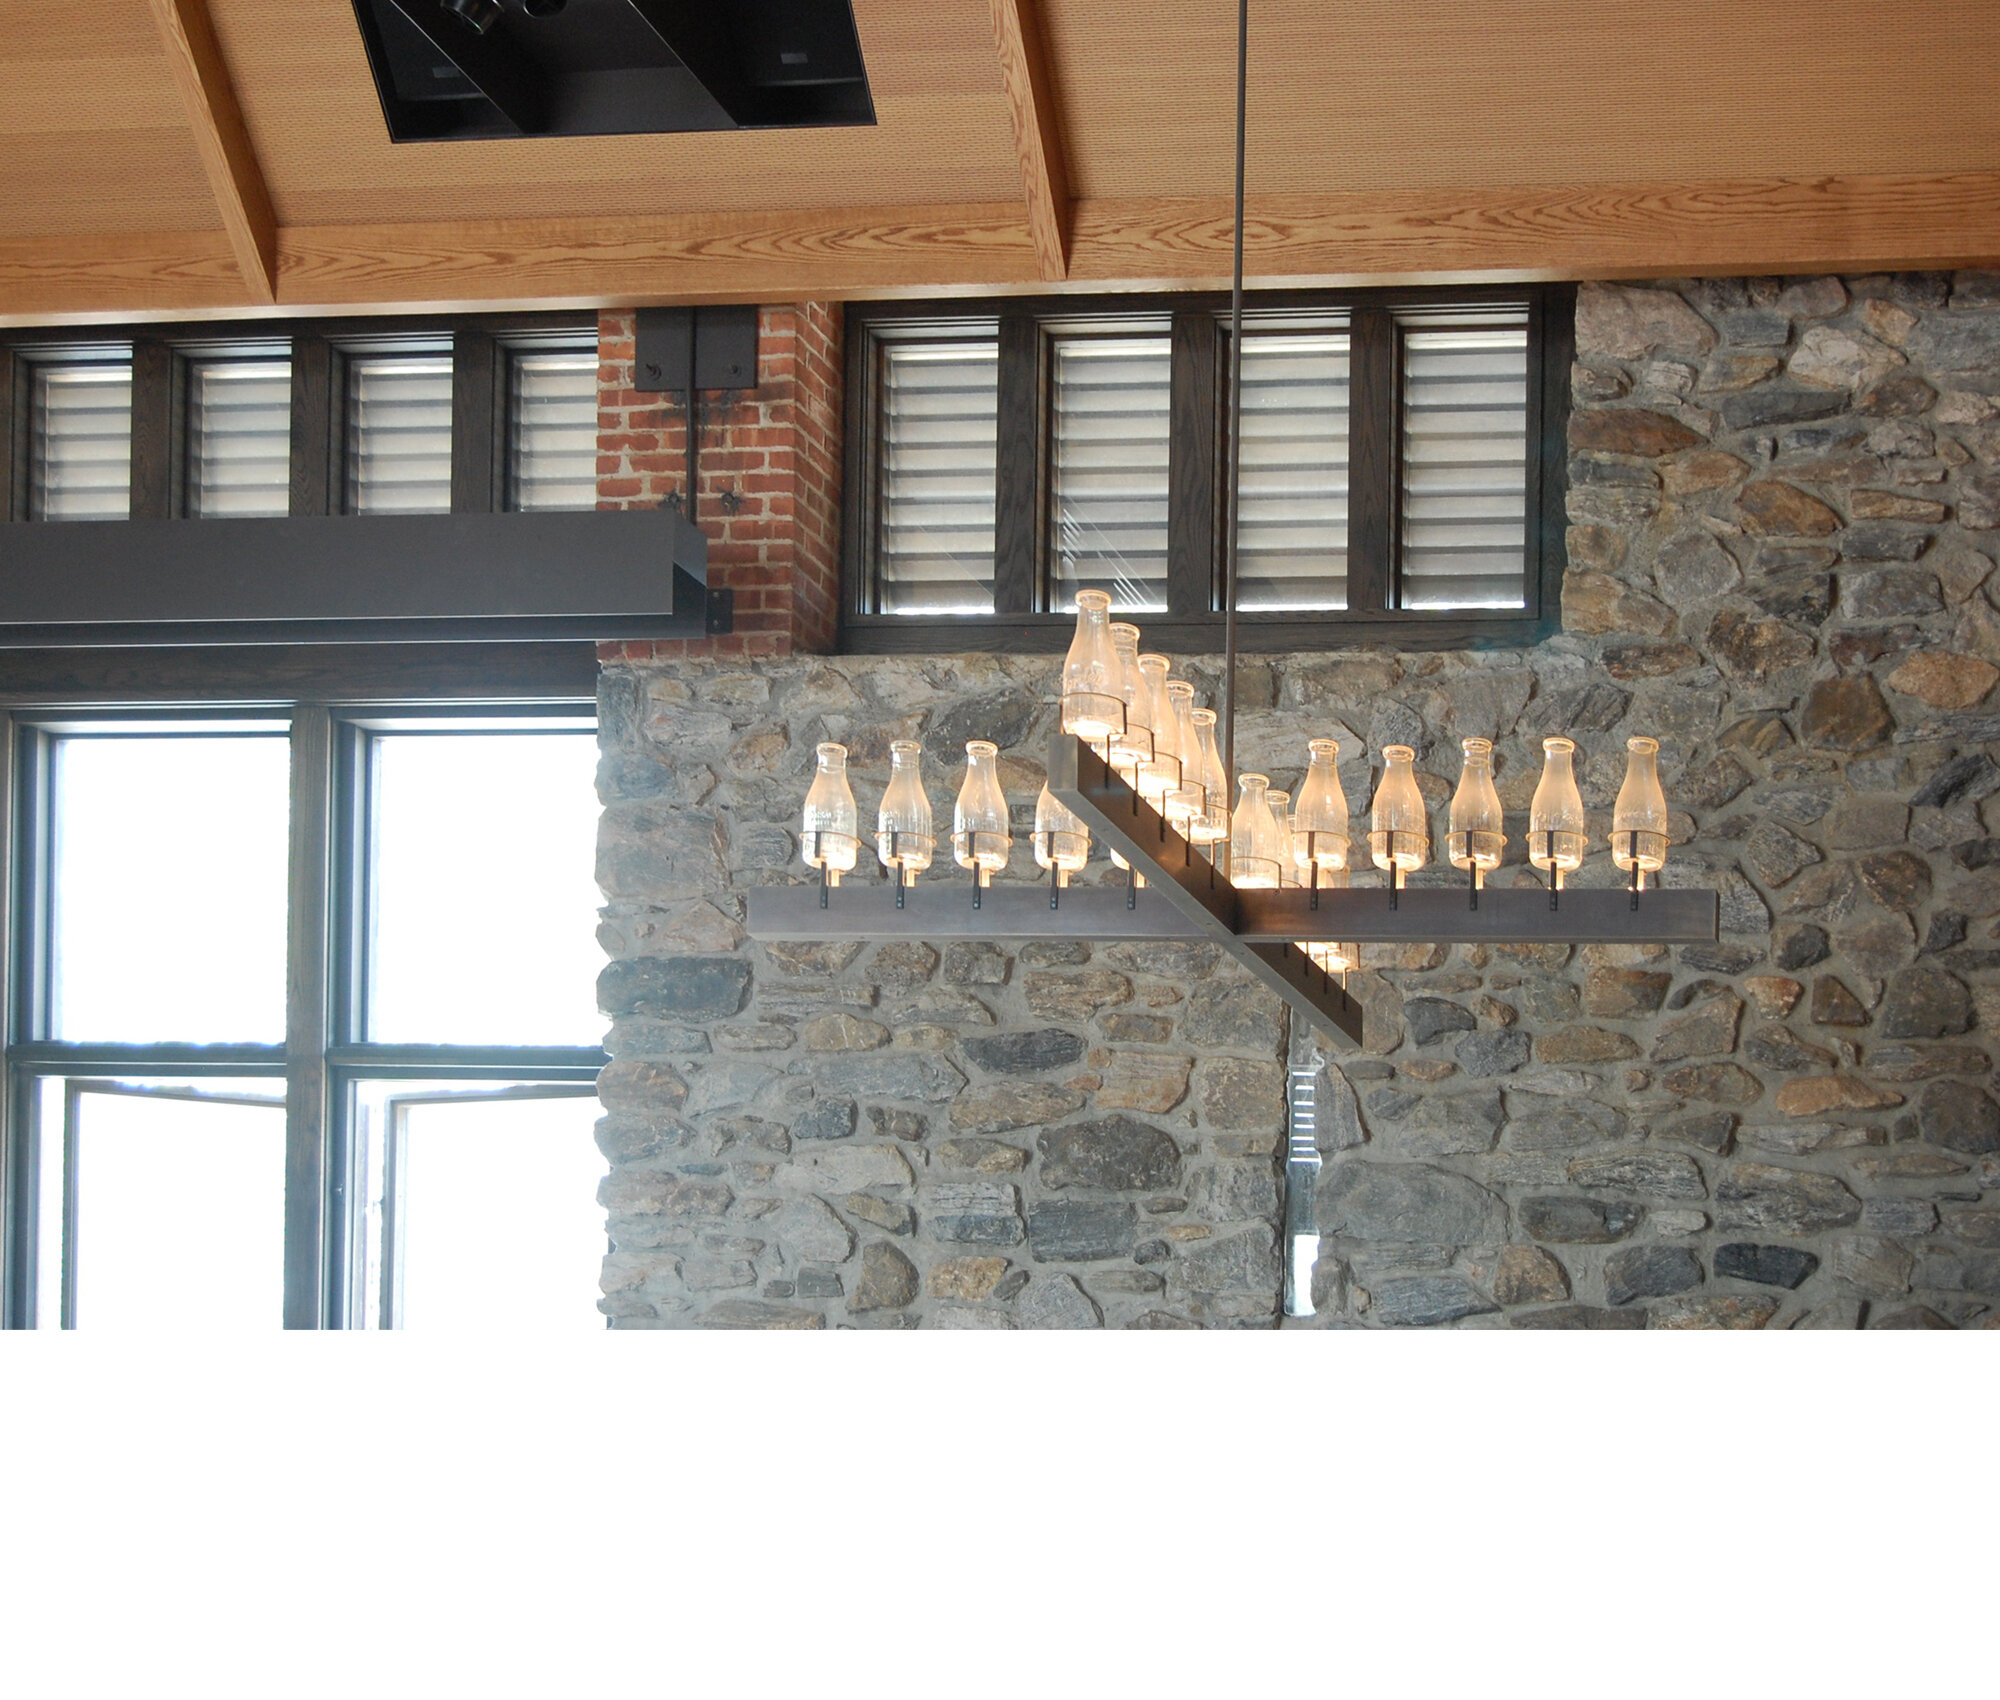 Prototype chandelier with local antique milk bottles.  Designed by Chris Lehrecke and Peter Guzy.